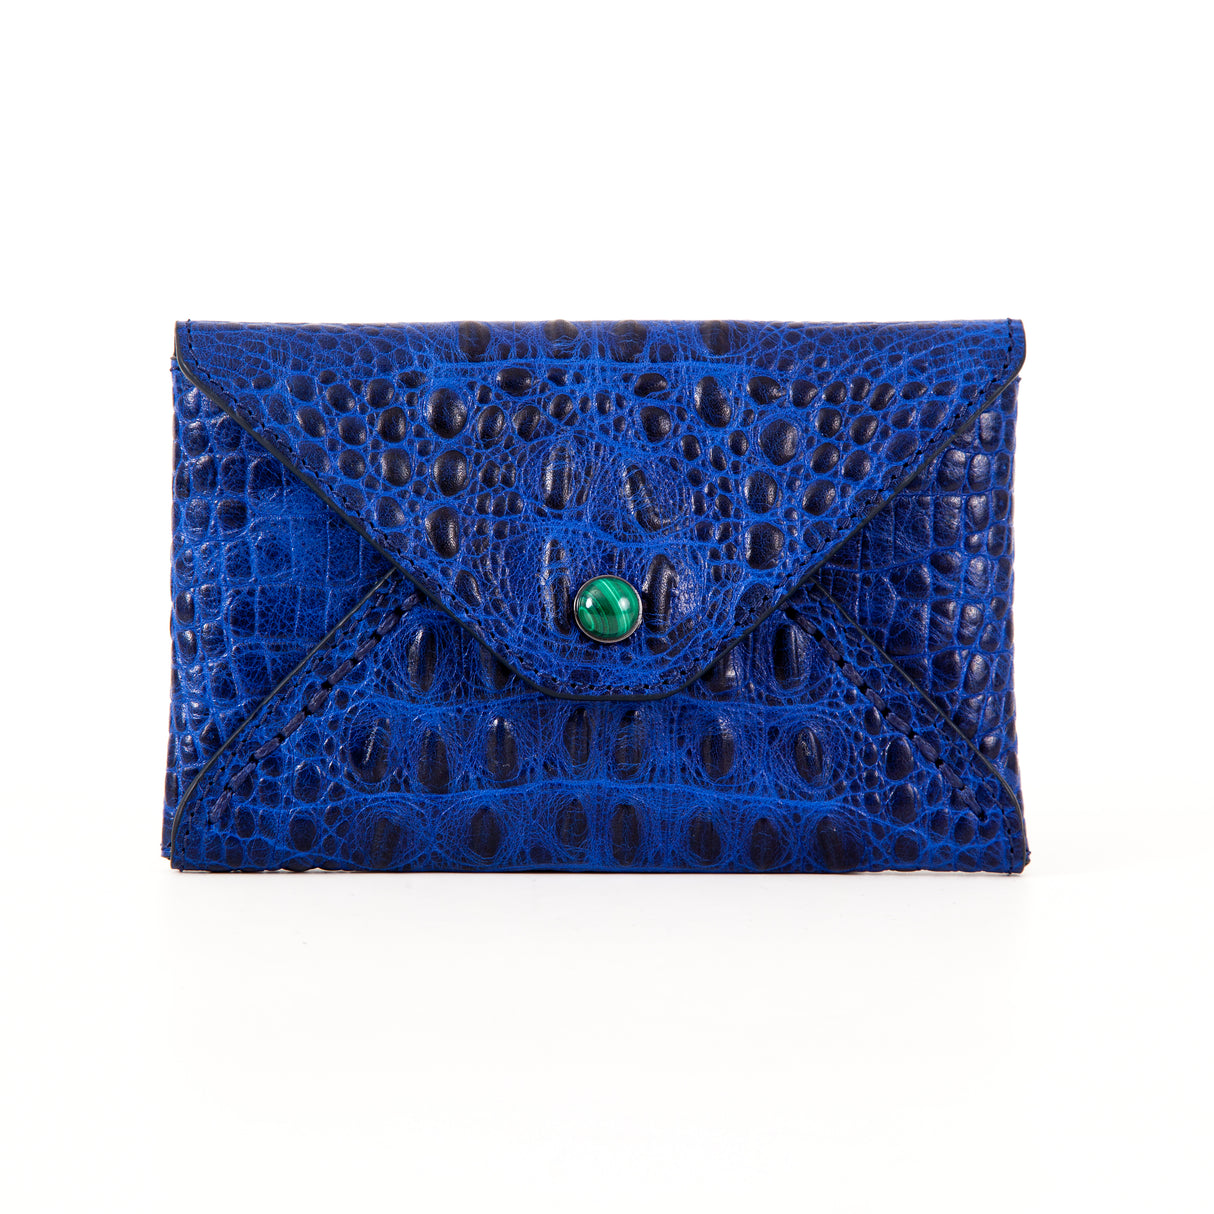 Mini envelopes sealed with Madame Malachite's kiss, as a wallet or passport holder.  100% Embossed Croco Leather   Jeweled with natural malachite stone